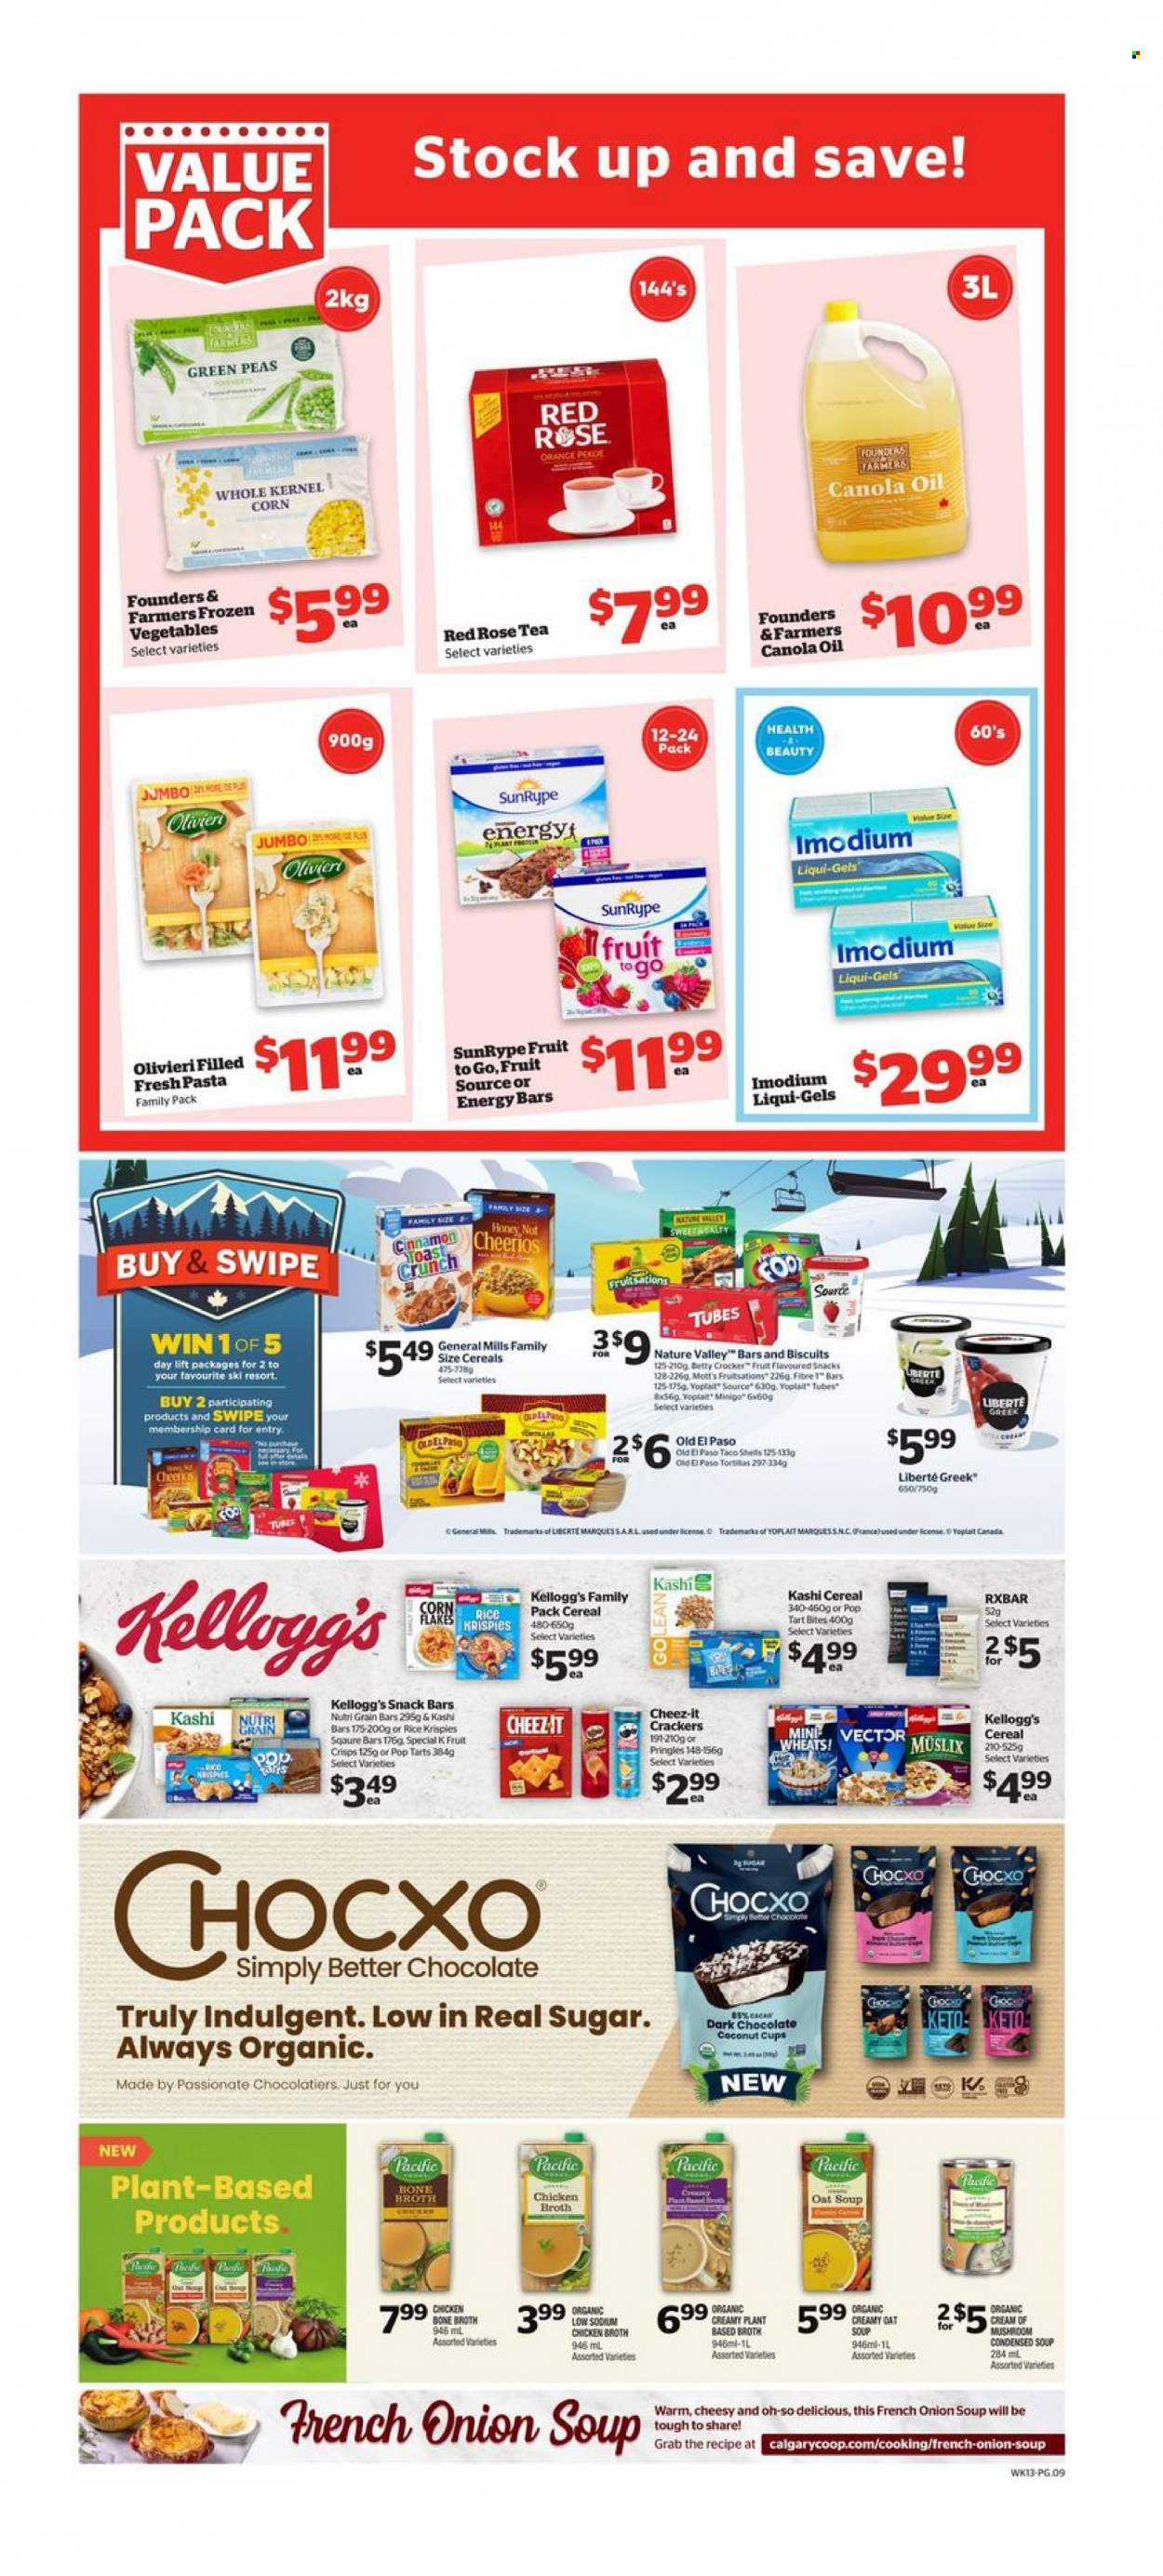 thumbnail - Calgary Co-op Flyer - January 26, 2023 - February 01, 2023 - Sales products - tortillas, Old El Paso, corn, pears, coconut, oranges, Mott's, onion soup, condensed soup, soup, instant soup, Yoplait, frozen vegetables, chocolate, snack, crackers, Kellogg's, biscuit, dark chocolate, Pop-Tarts, snack bar, Pringles, Cheez-It, sugar, chicken broth, oats, broth, cereals, Cheerios, Rice Krispies, energy bar, Nature Valley, Nutri-Grain, rice flakes, cinnamon, canola oil, oil, tea, wine, rosé wine, TRULY, beer, Mum, Imodium. Page 13.